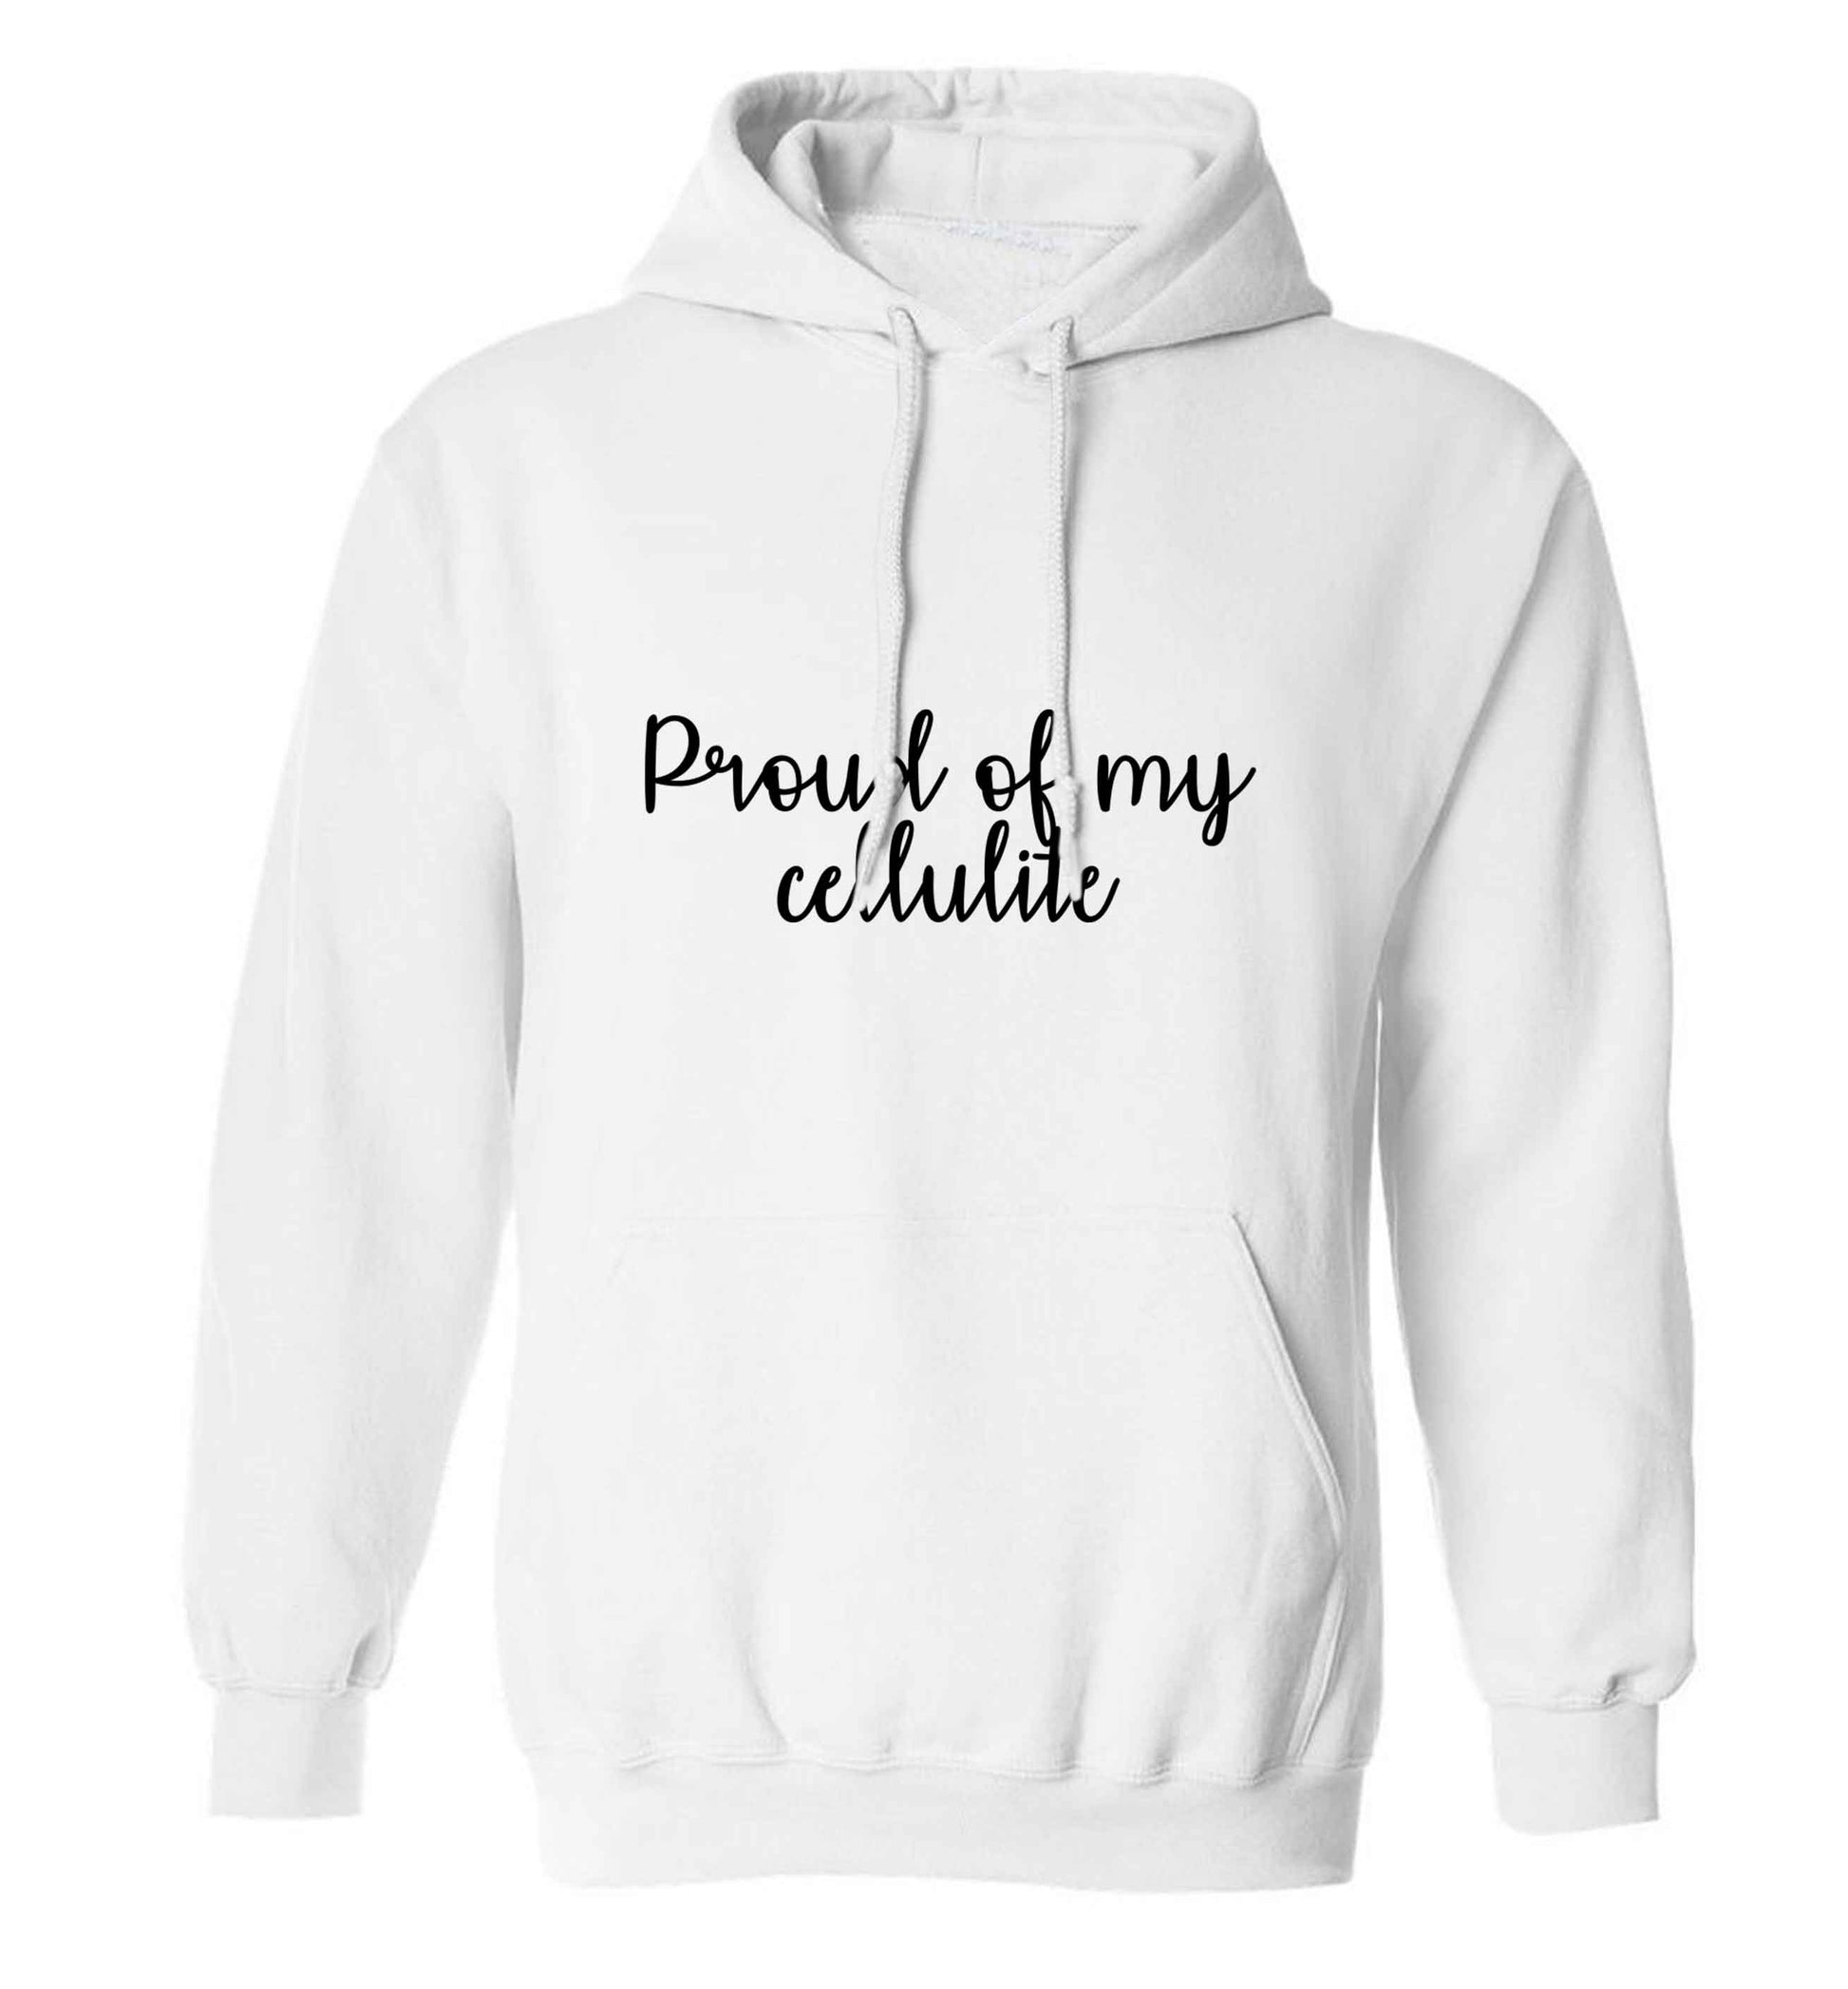 Proud of my cellulite adults unisex white hoodie 2XL